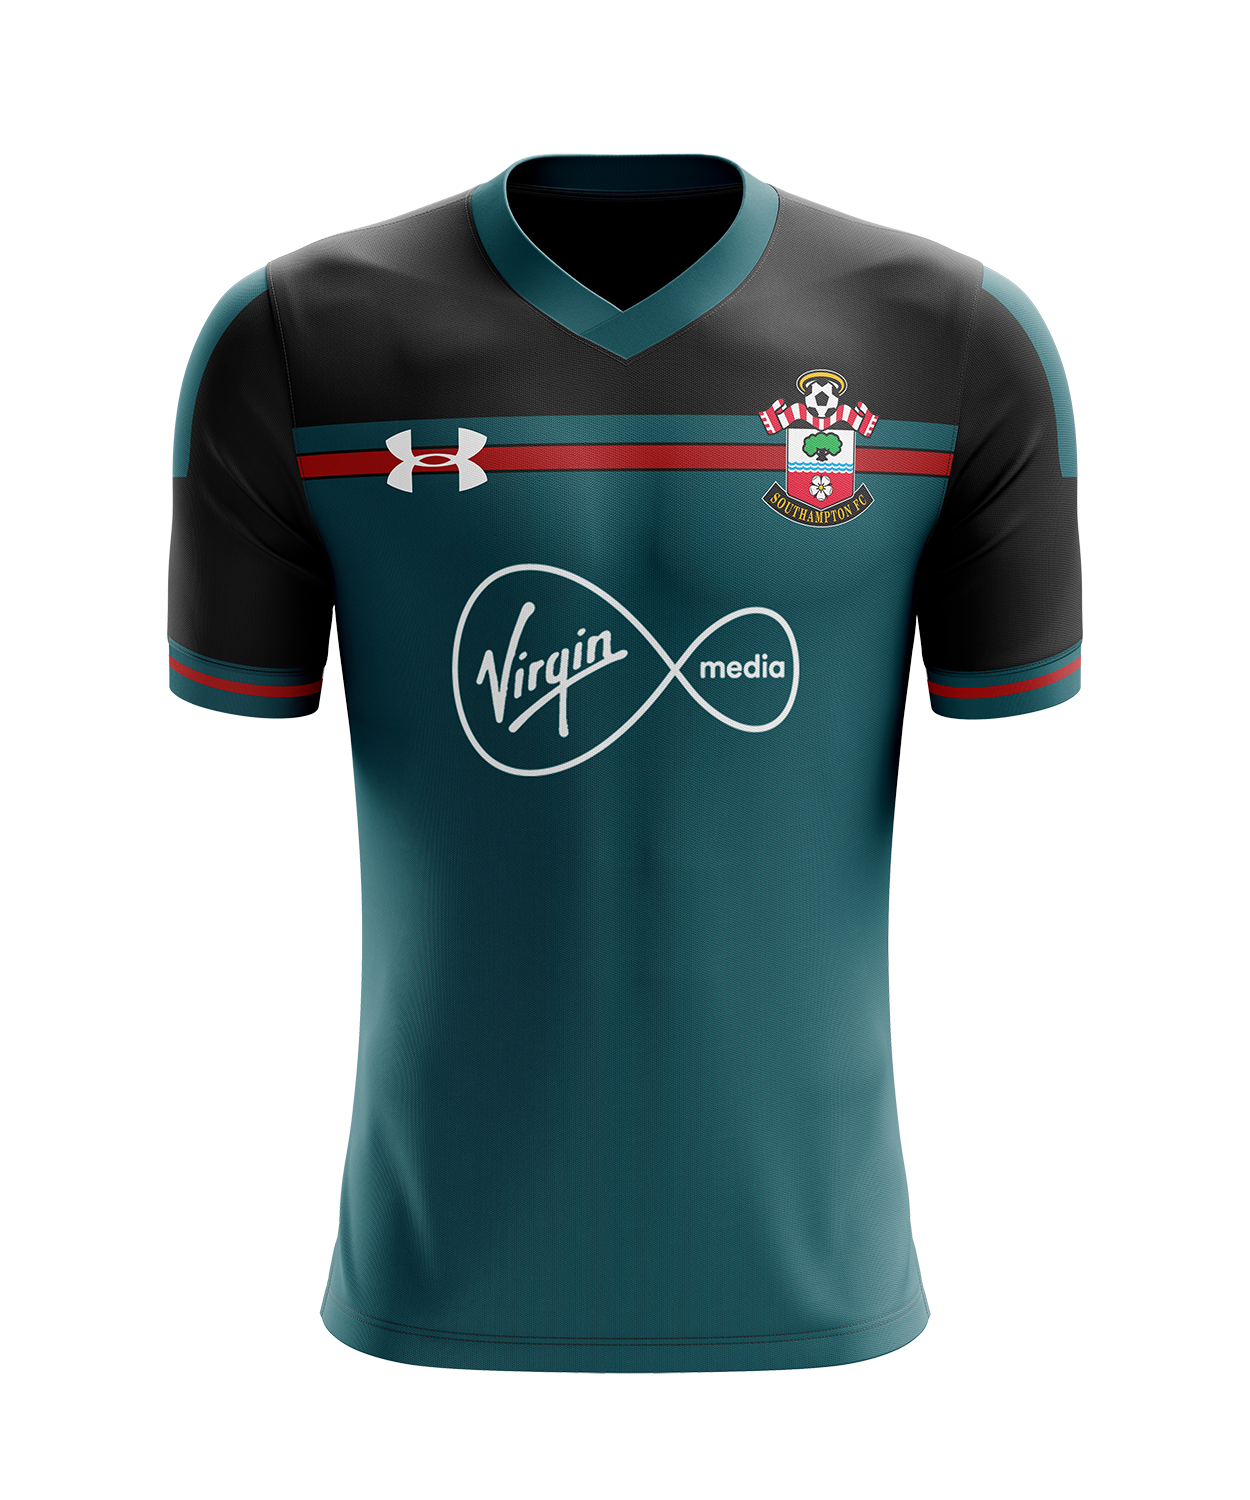 Redesign_FM on Twitter: "Southampton FC concept kit ...